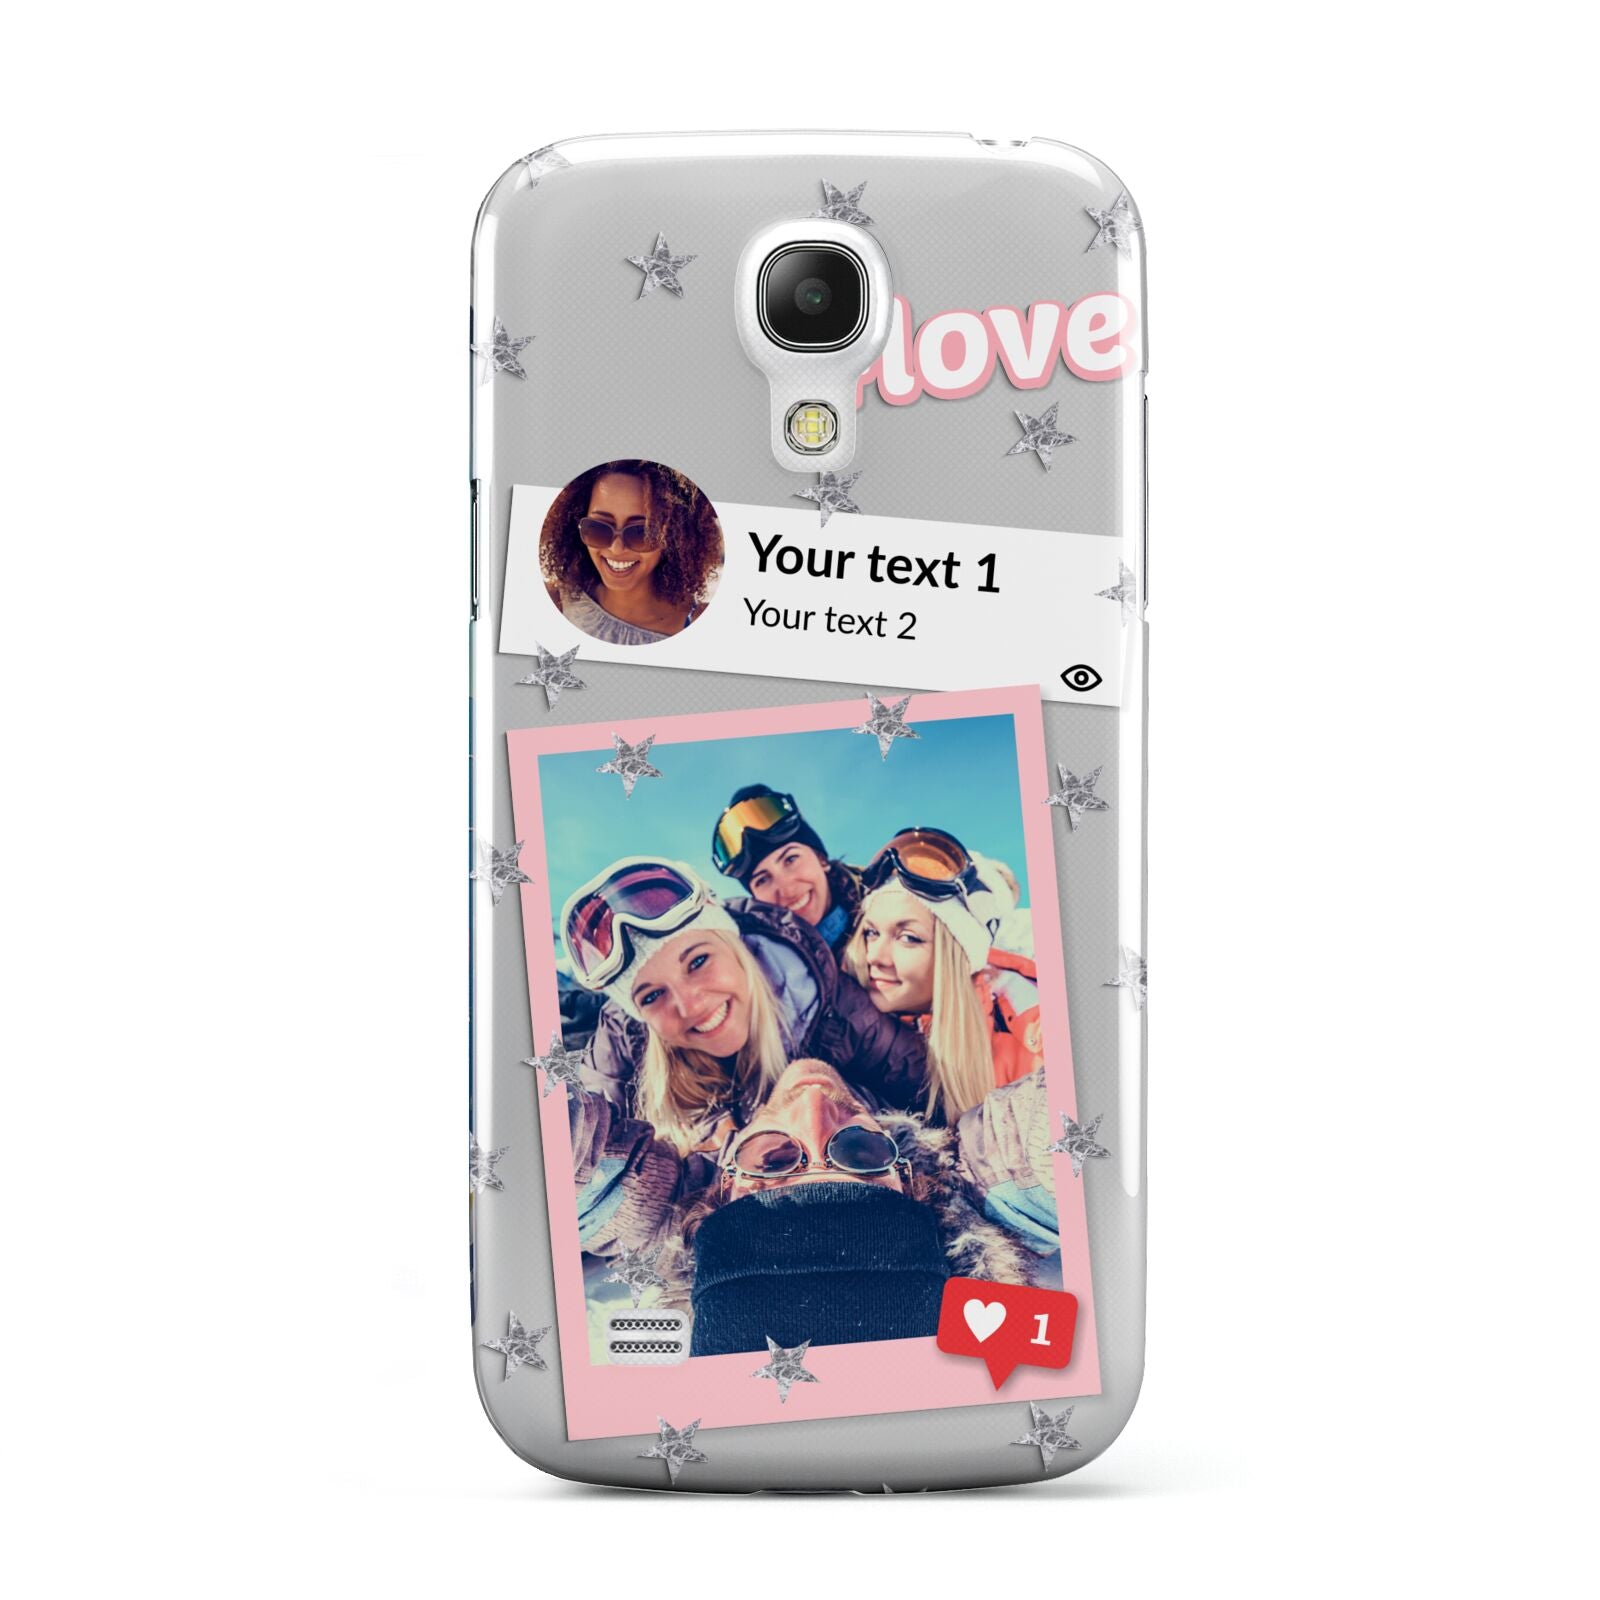 Starry Social Media Photo Montage Upload with Text Samsung Galaxy S4 Mini Case